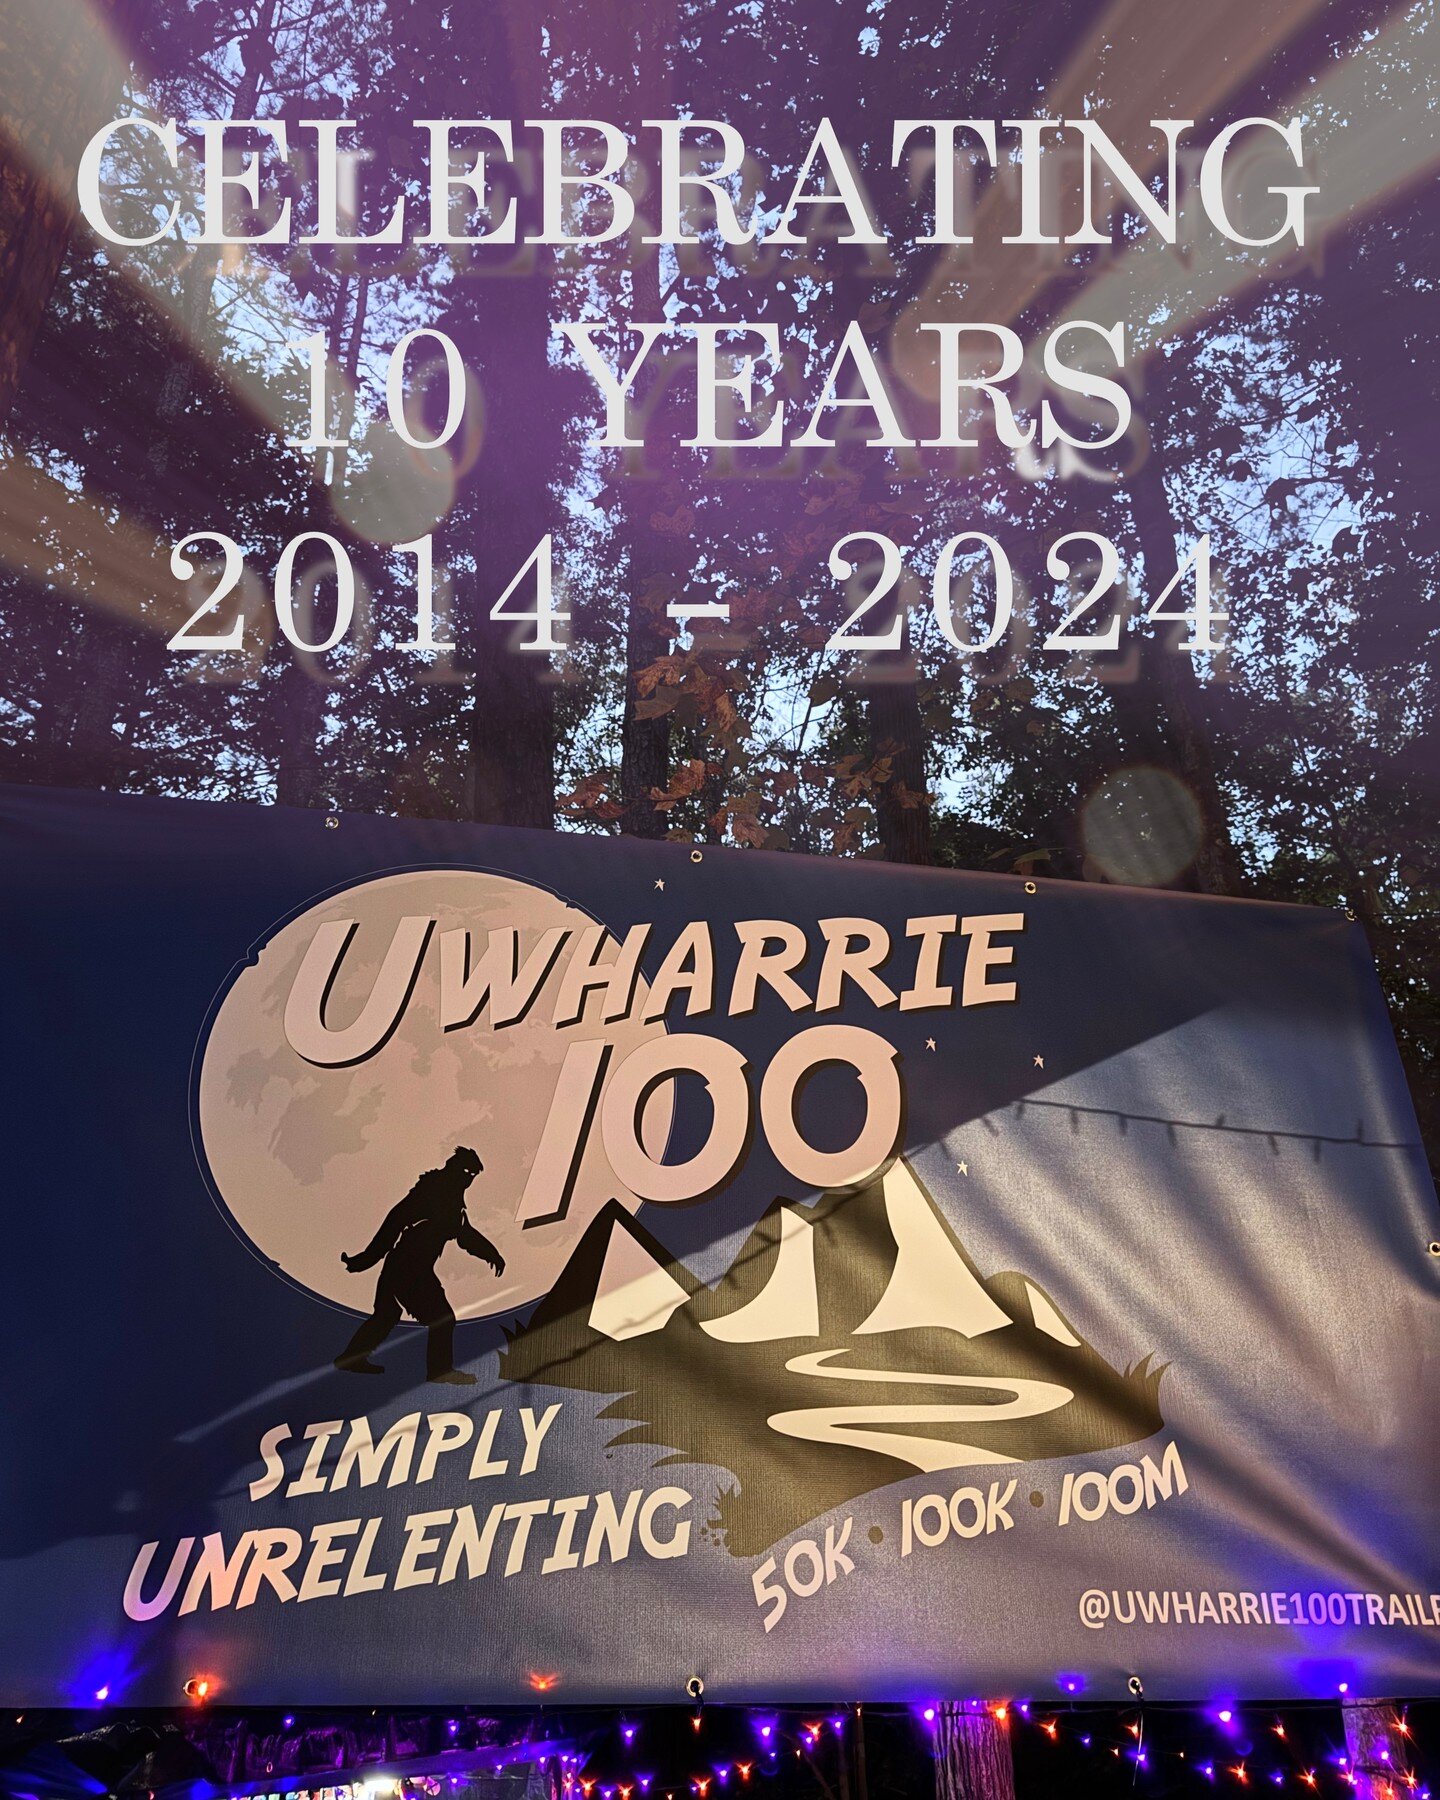 GIVEAWAY ALERT! To celebrate TEN YEARS of the @uwharrie100trailrun ; we will be holding TEN MONTHLY drawings leading up to race day. Any registered runner of any distance is eligible. Drawings will be held on the last day of the month and results wil